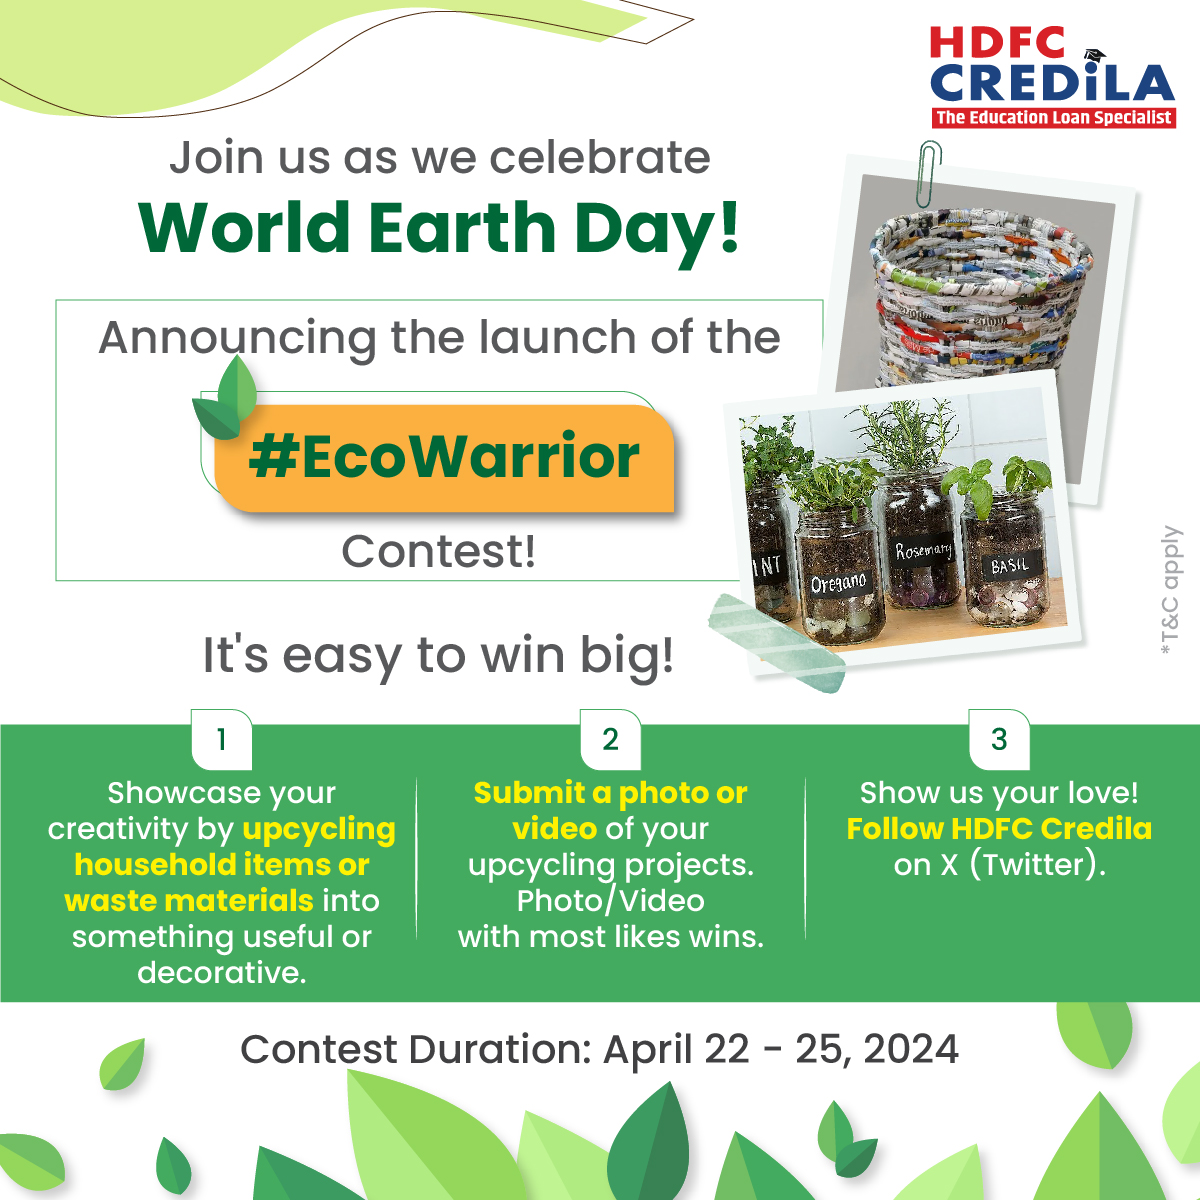 Win an Amazon e-voucher of ₹1,000! Participate now! 

*T&C apply bit.ly/3UtjhLJ

#HDFCCredila #HDFCCredilaContest #EcoWarrior #WorldEarthDay #WorldEarthDay2024 #EarthDay #Earthday2024 #Contest #PhotoContest #VideoContest #ContestAlert #ContestTime #GiveAway